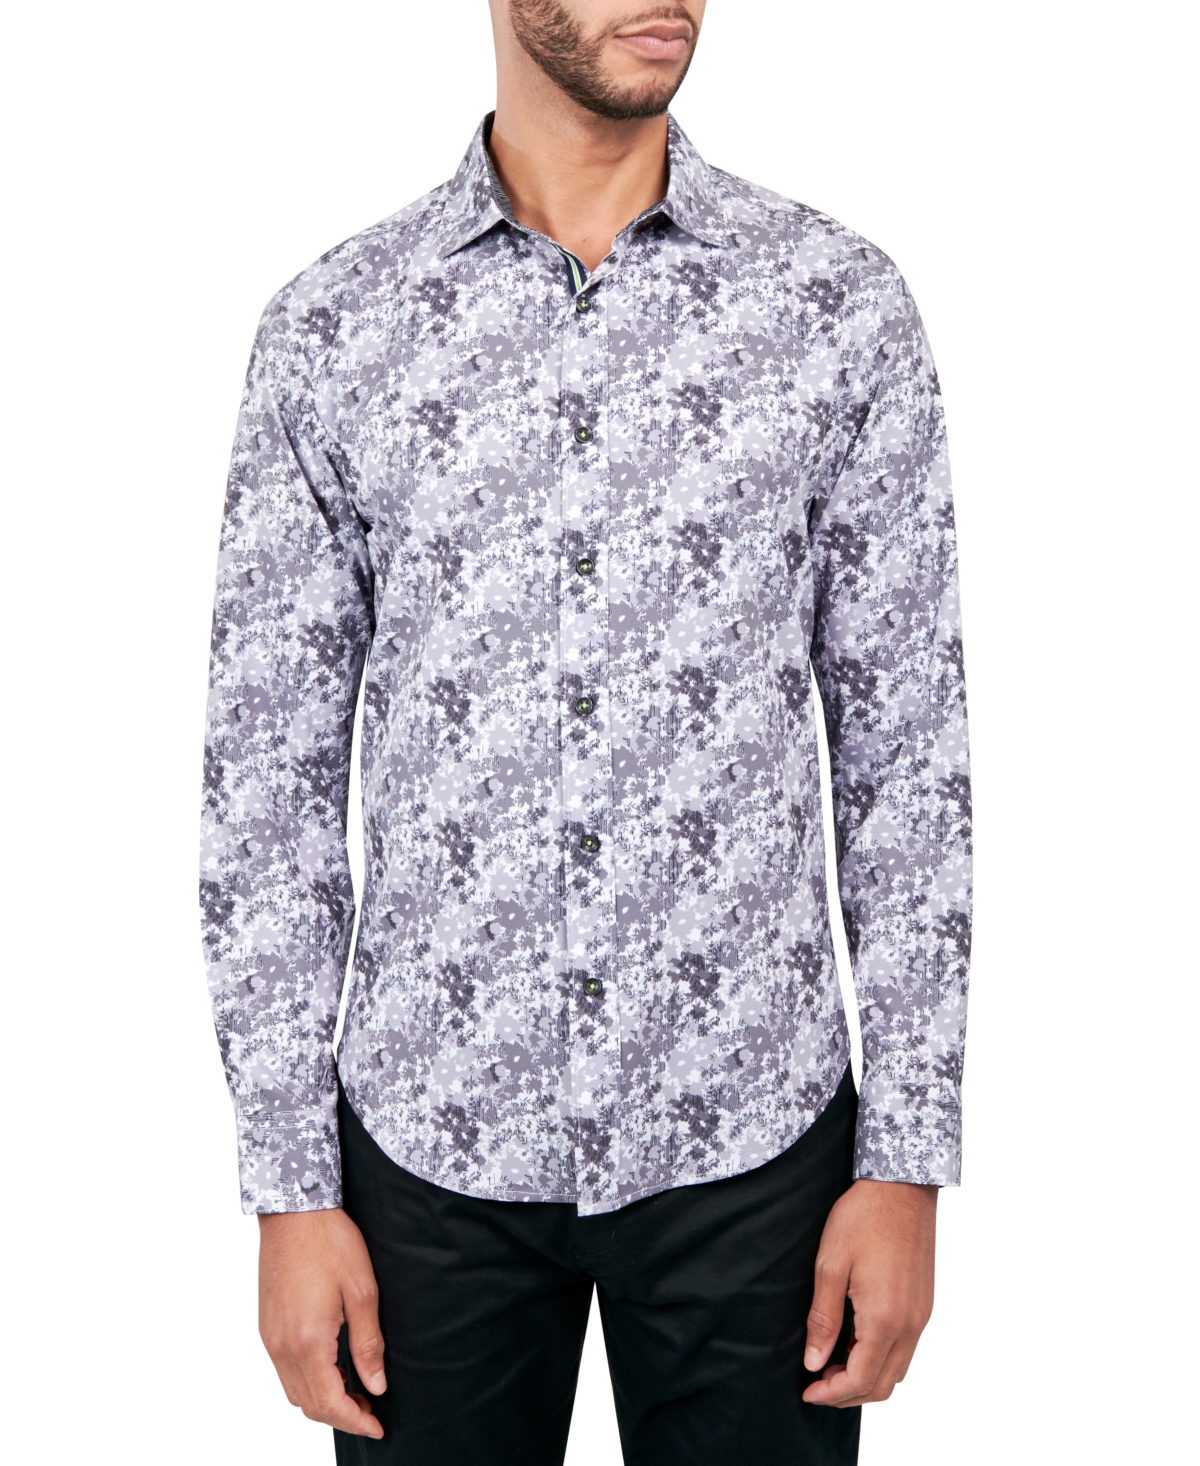 Men's Regular-Fit Non-Iron Performance Stretch Abstract Floral Button-Down Shirt - Grey